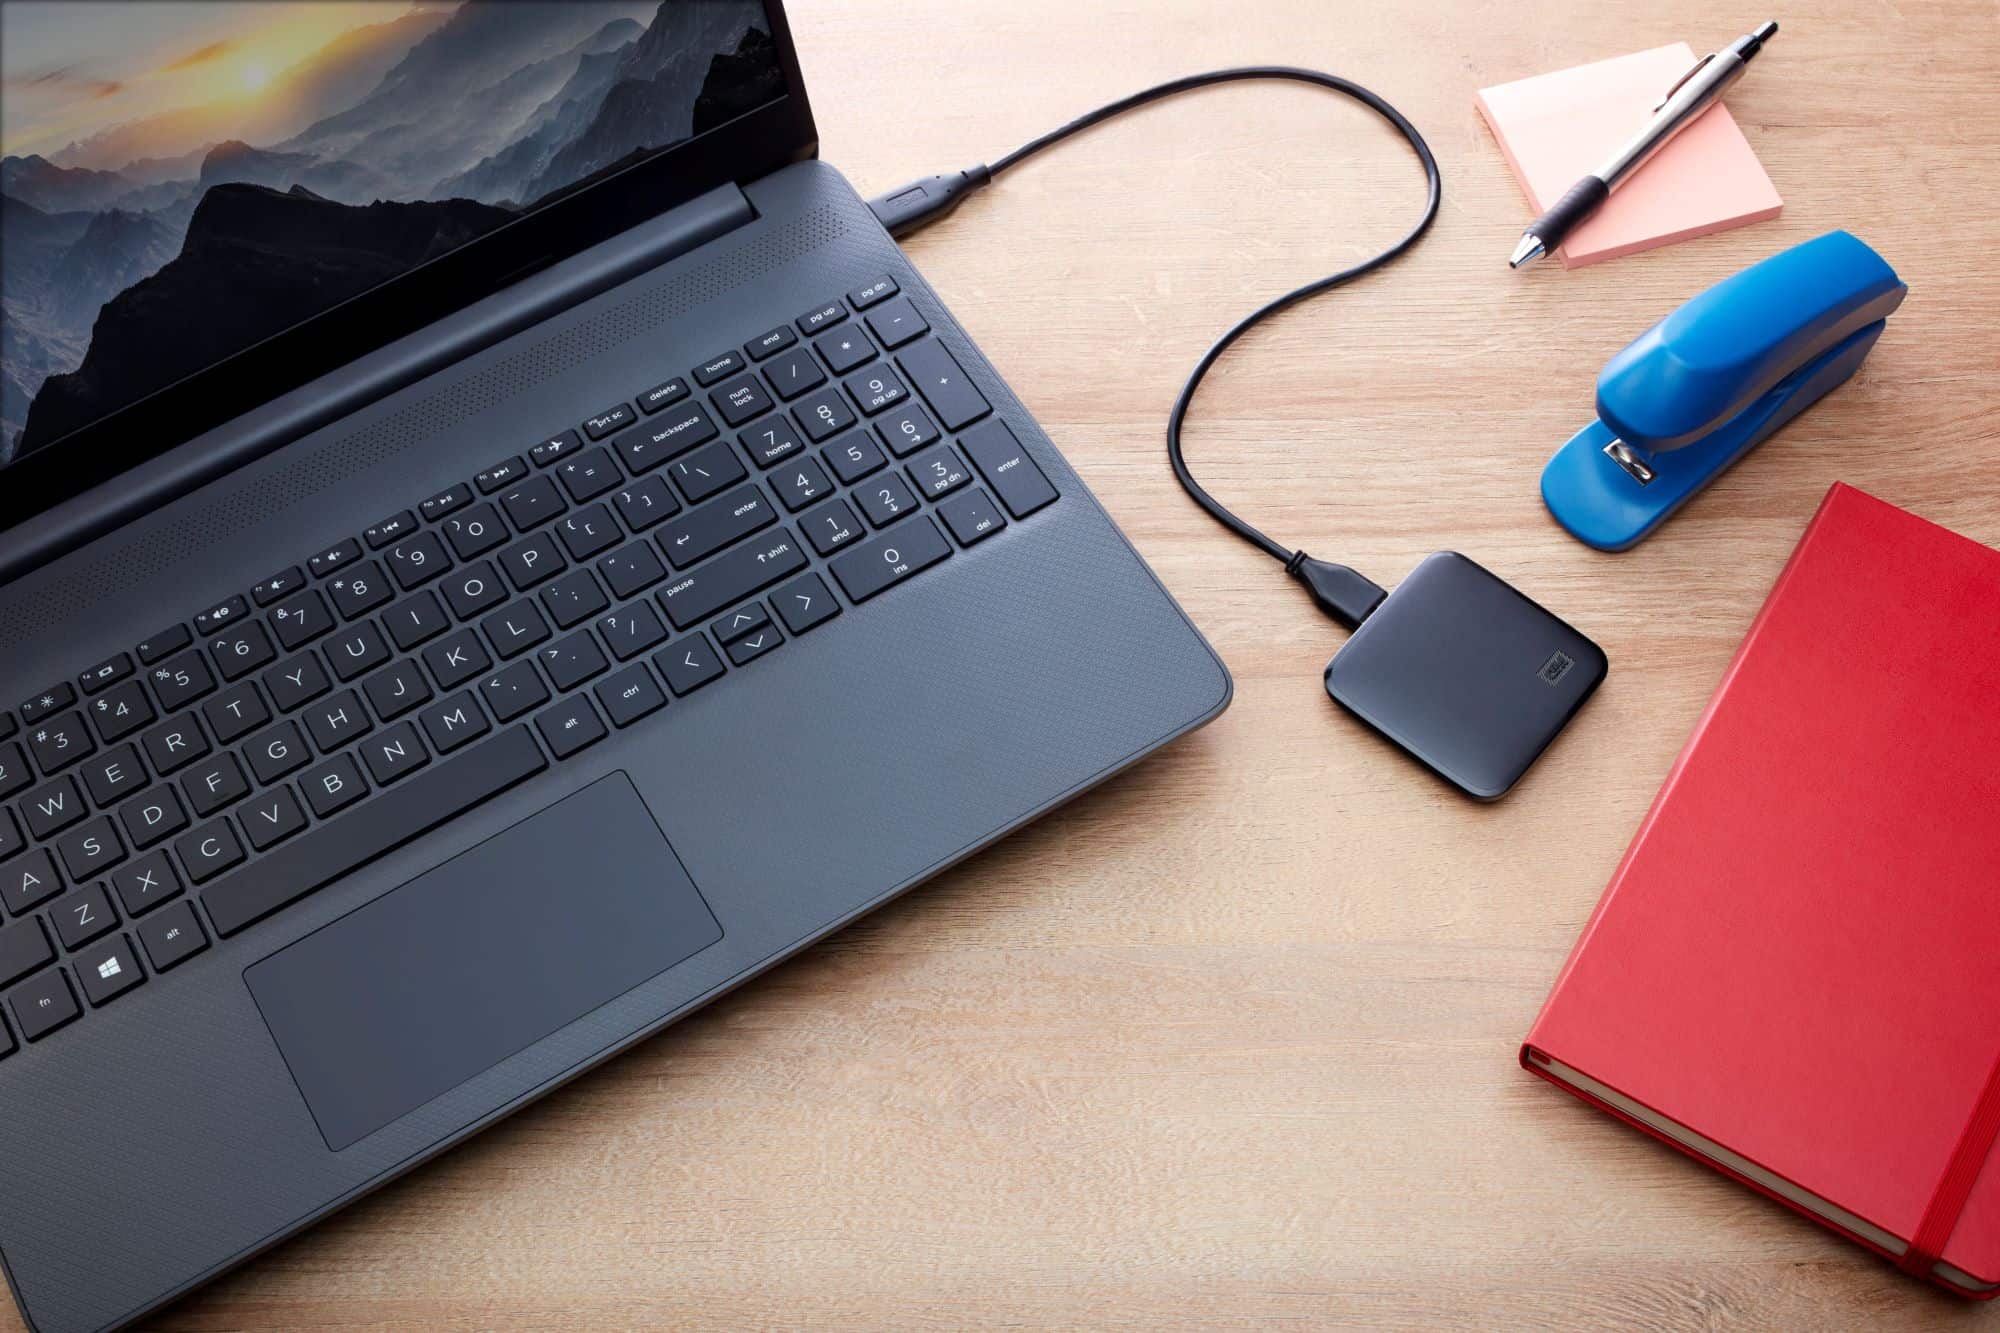 Western Digital Offers New, Pocket-Sized Portable SSD to Mainstream Consumers